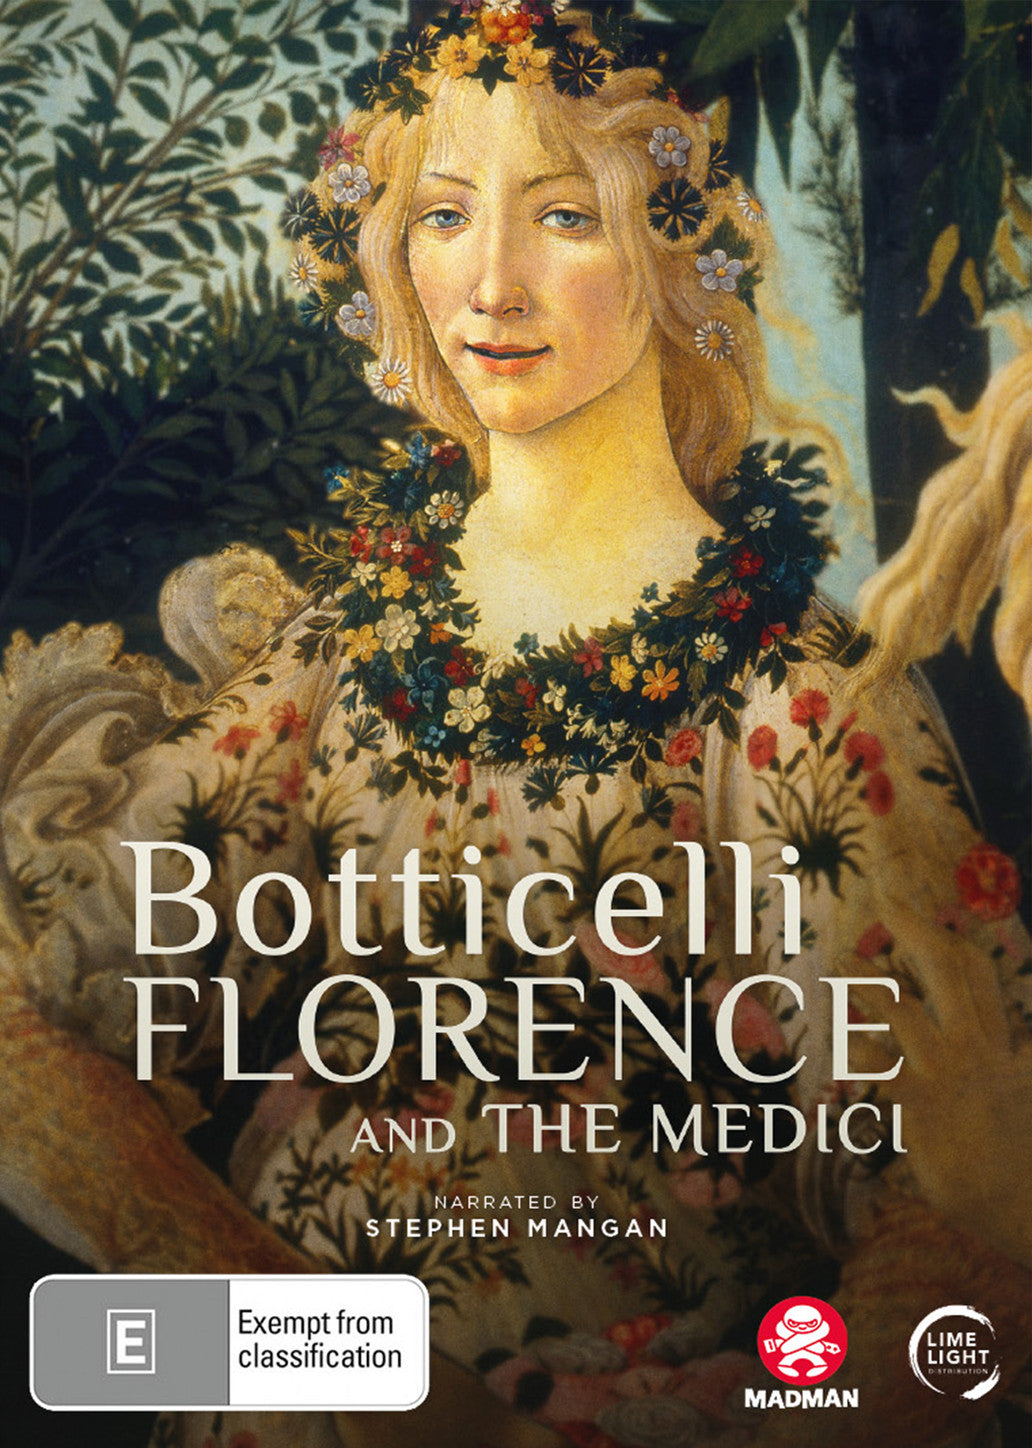 BOTTICELLI, FLORENCE AND THE MEDICI